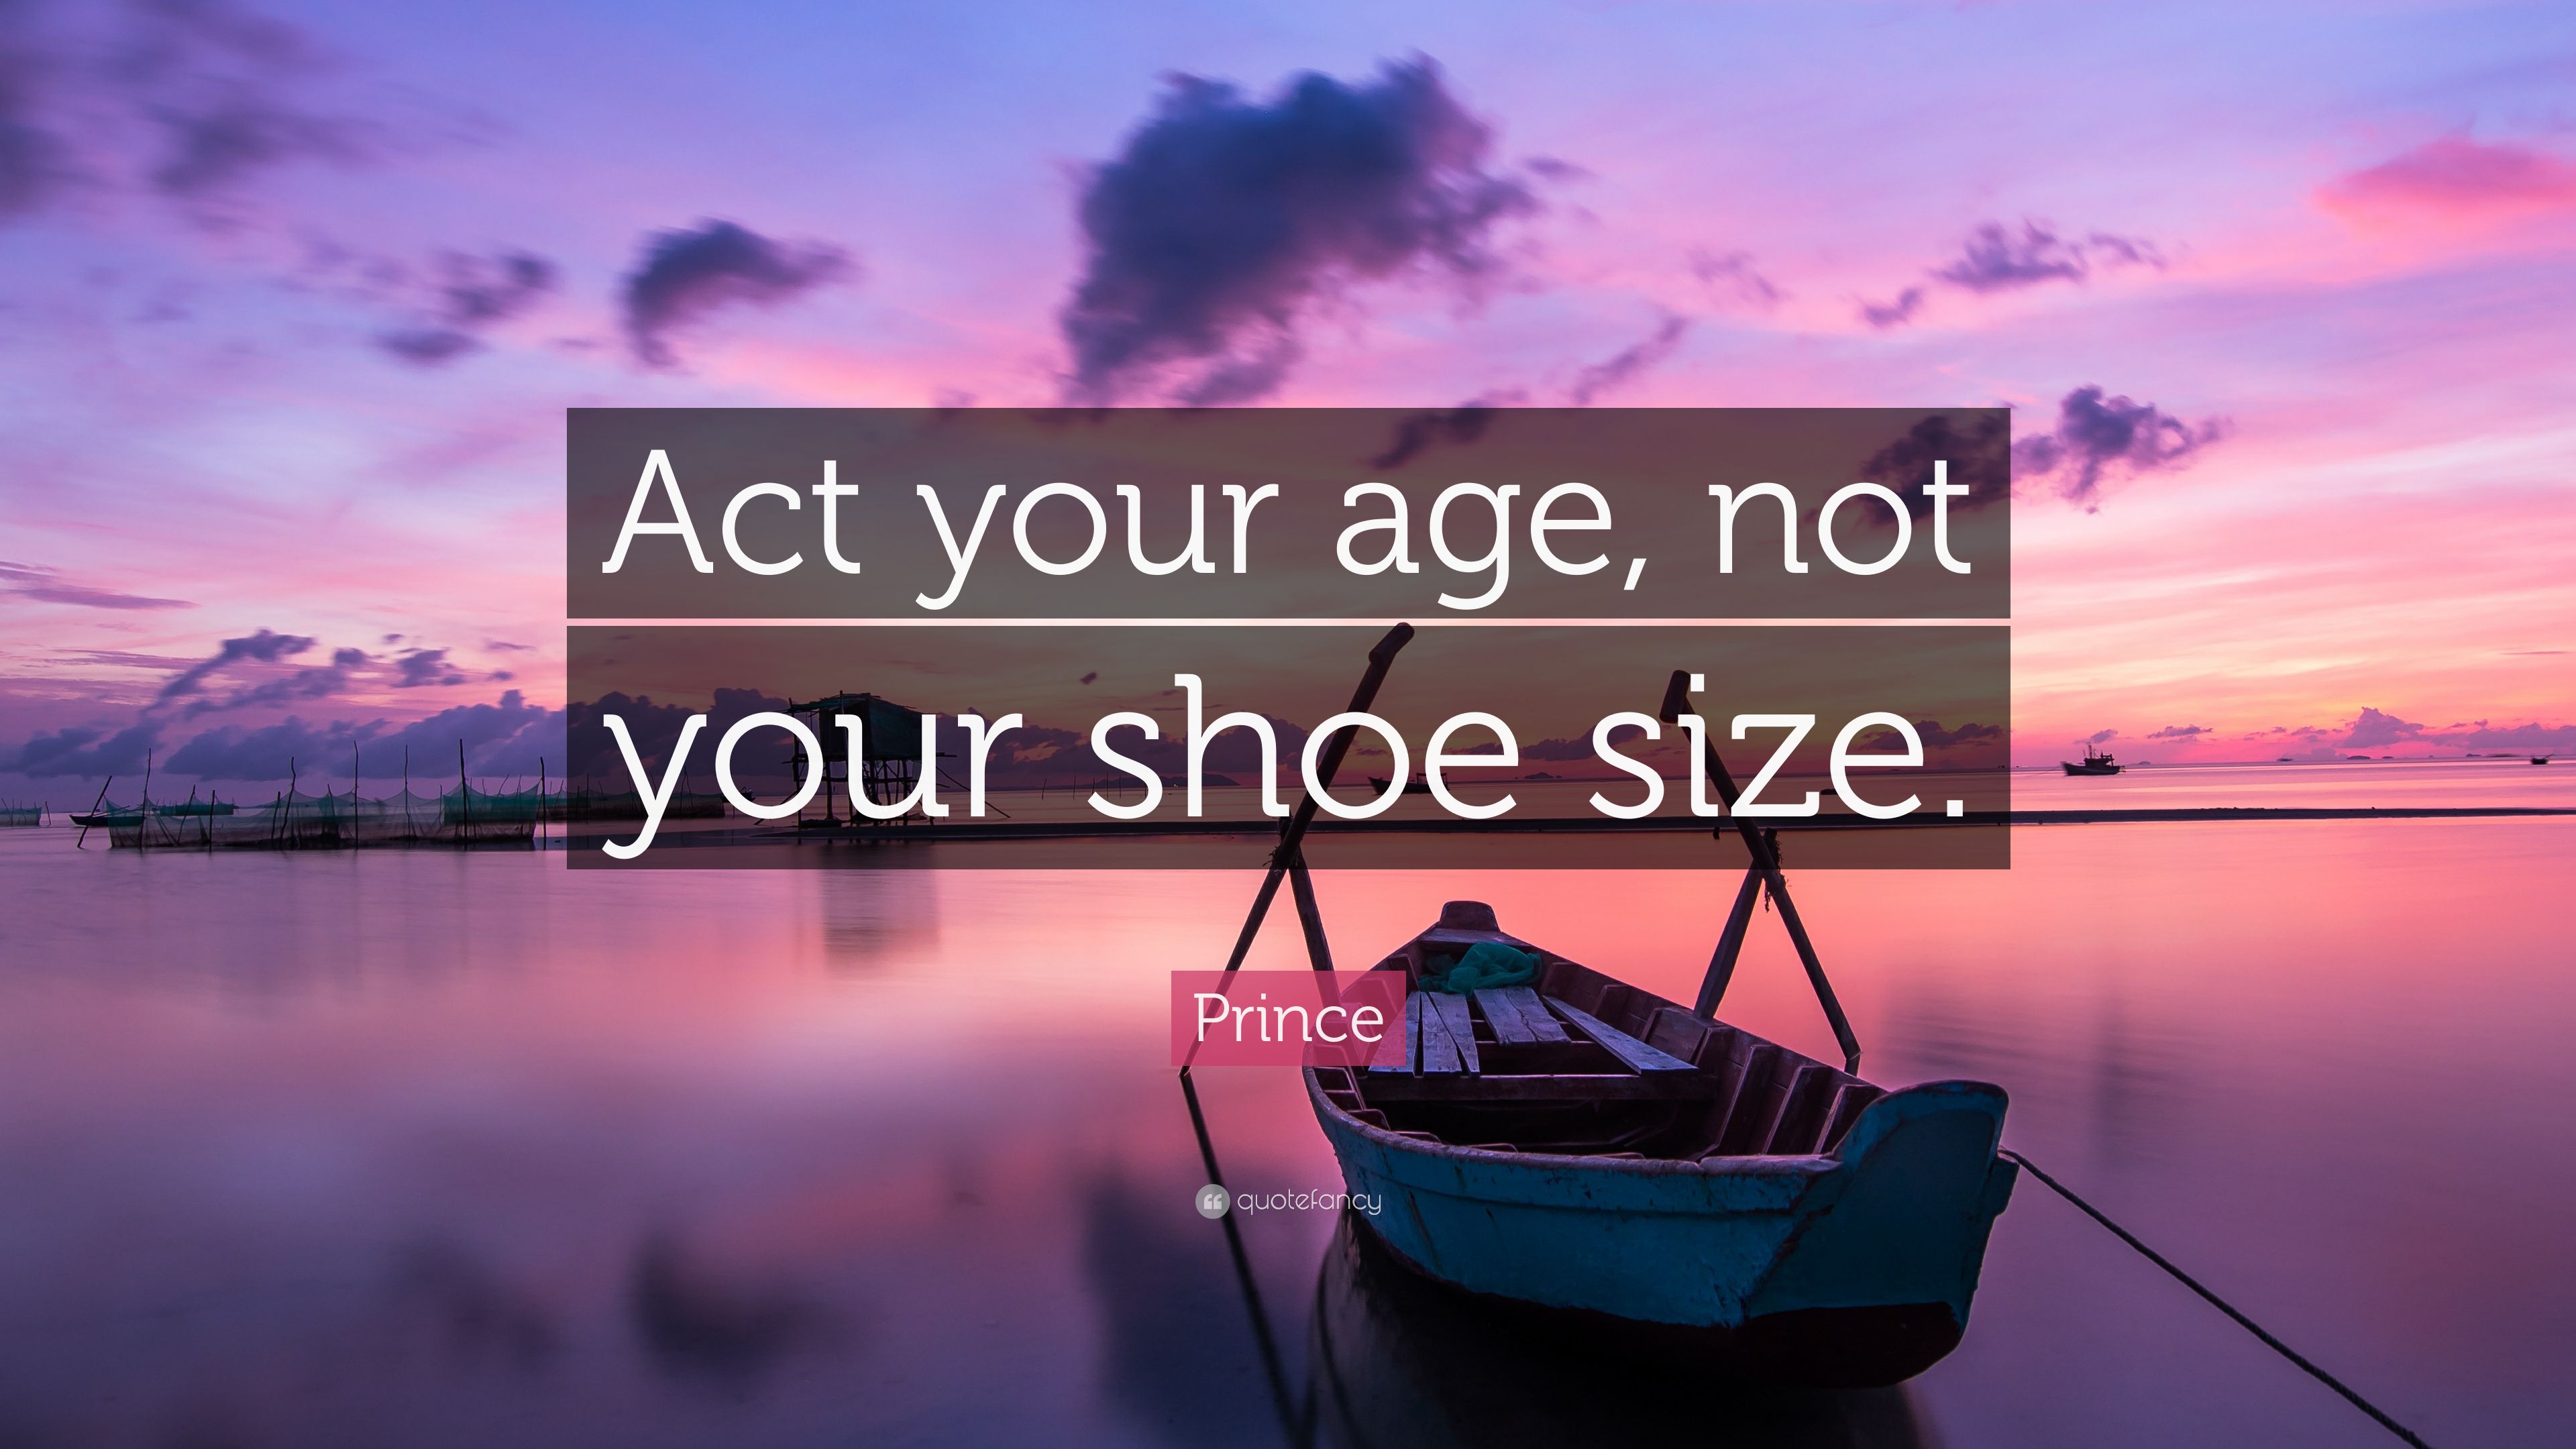 Prince Quote: “Act your age, not your shoe size.” 10 wallpaper